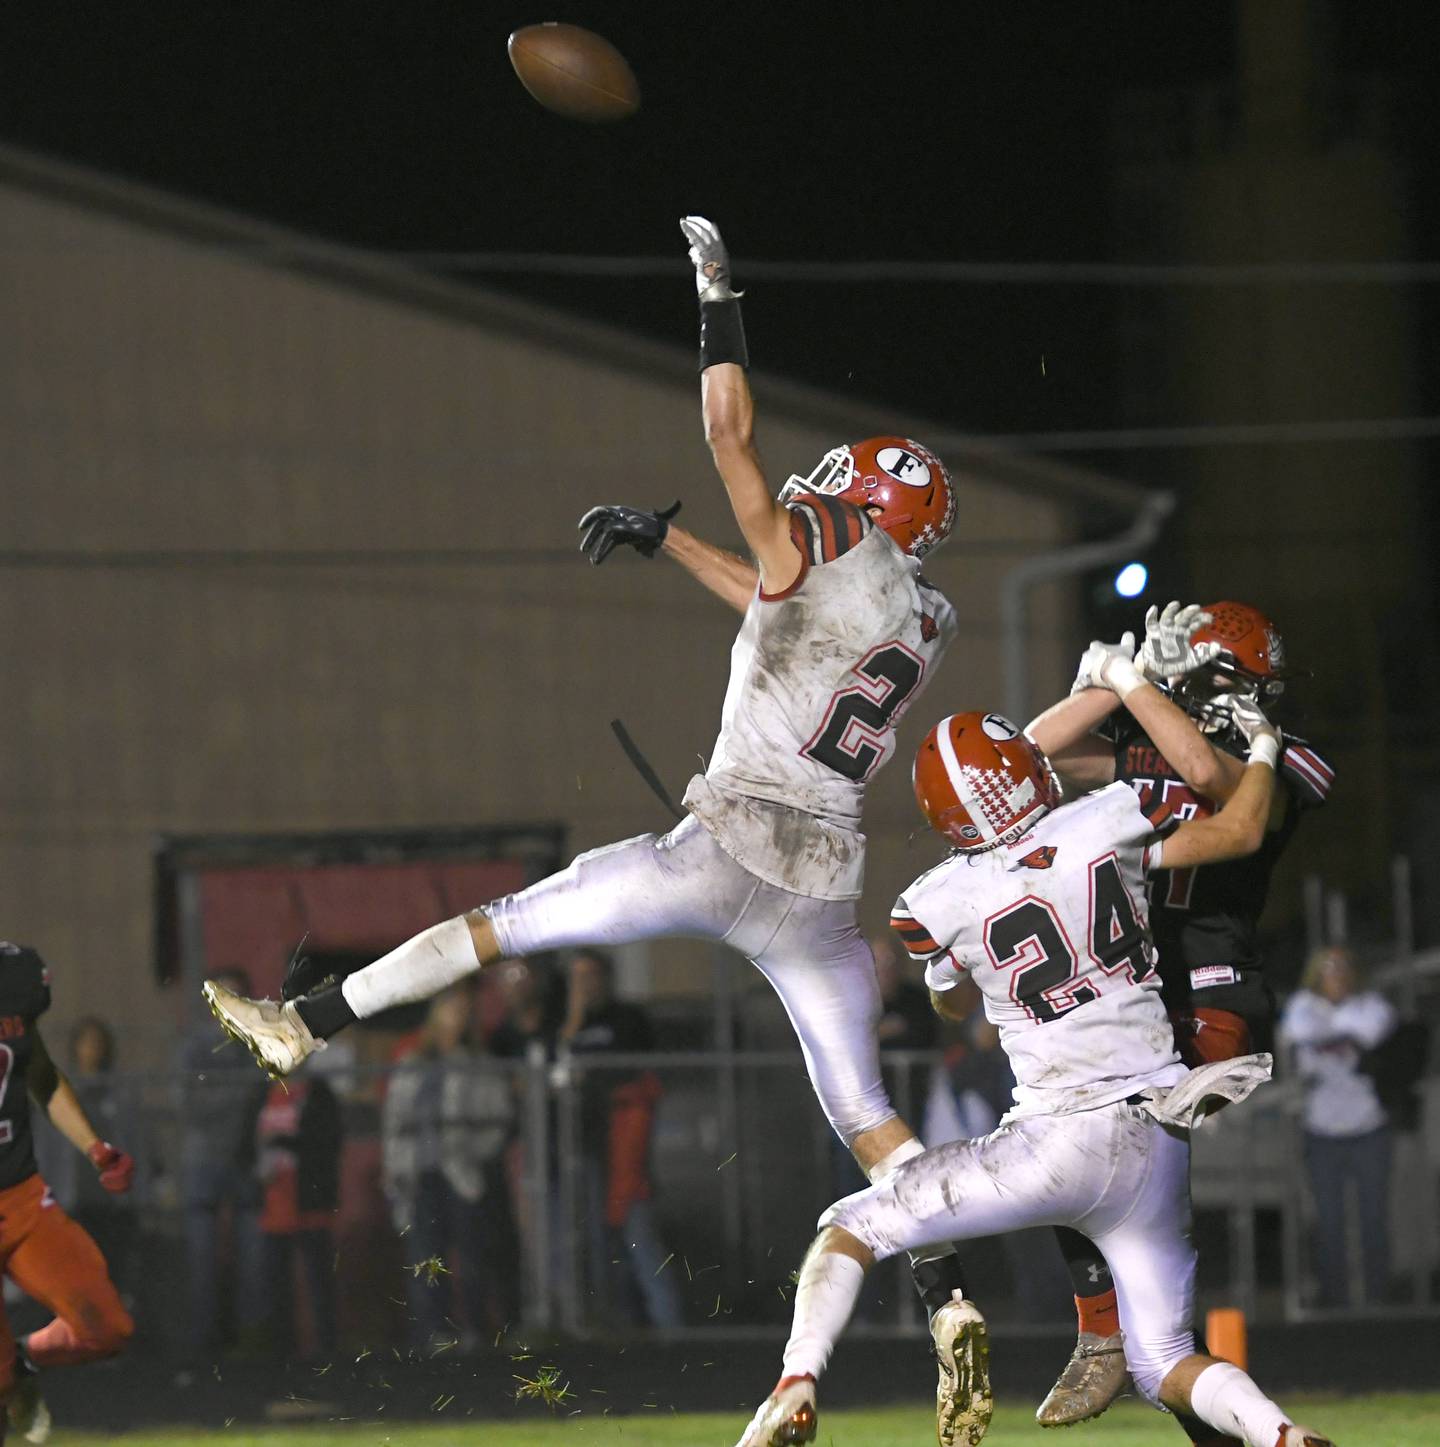 Forreston's Matthew Betran deflects a pass in the endzone that is then caught by Noah Johnson.